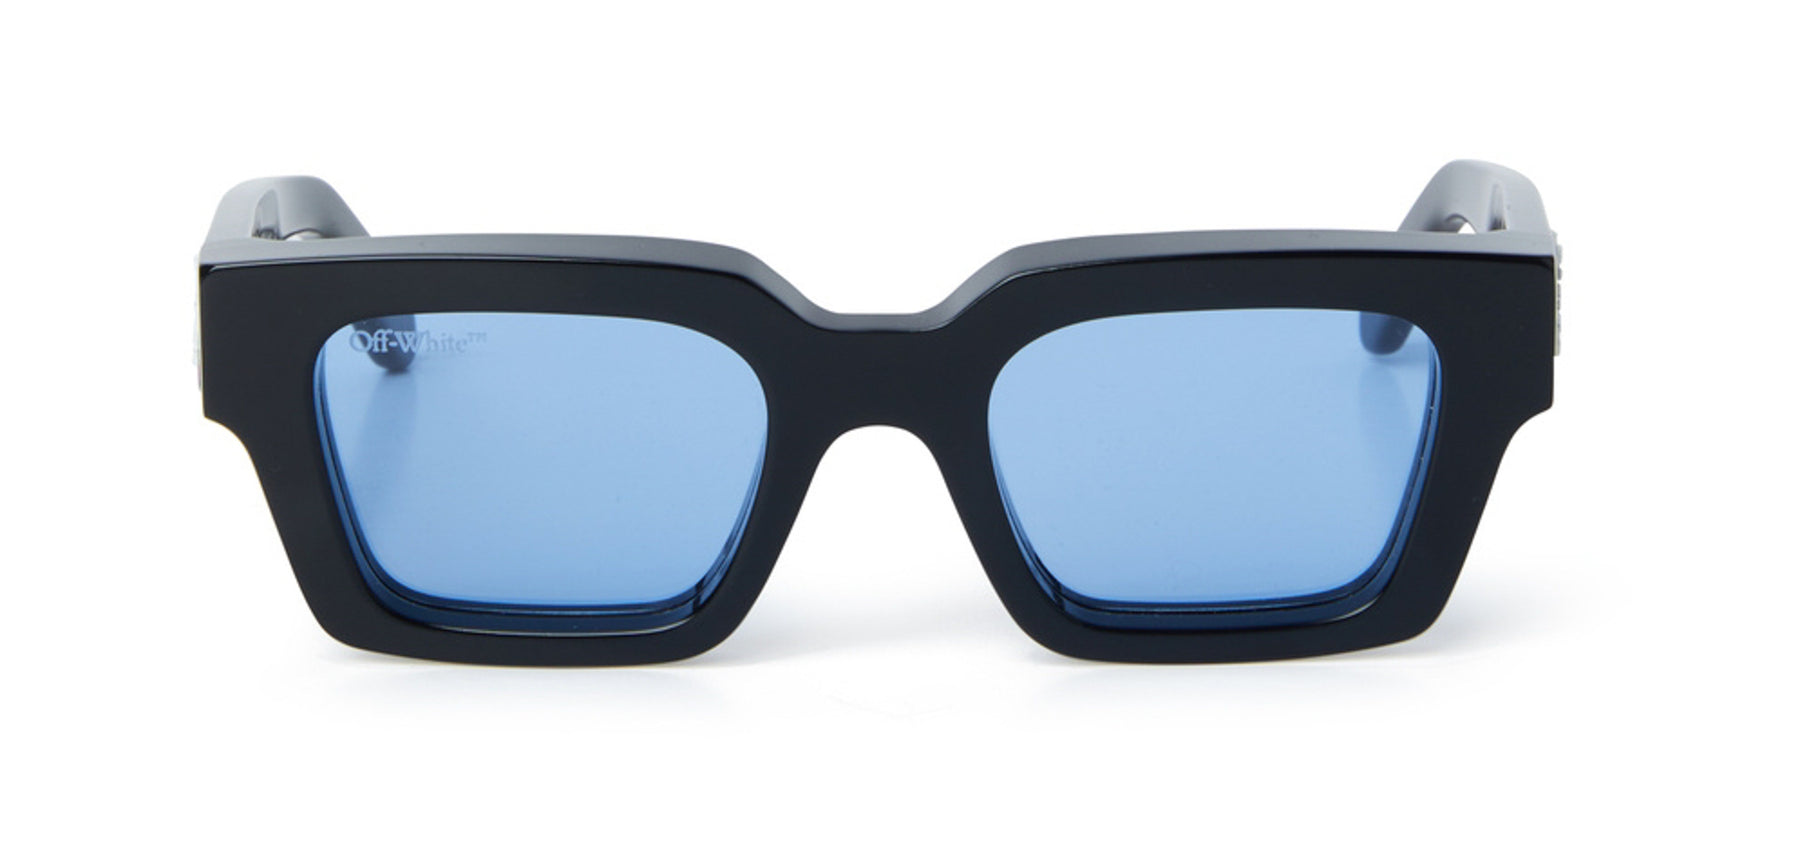 OFF-WHITE Virgil Rectangle-frame Sunglasses - Blue - Realry: A